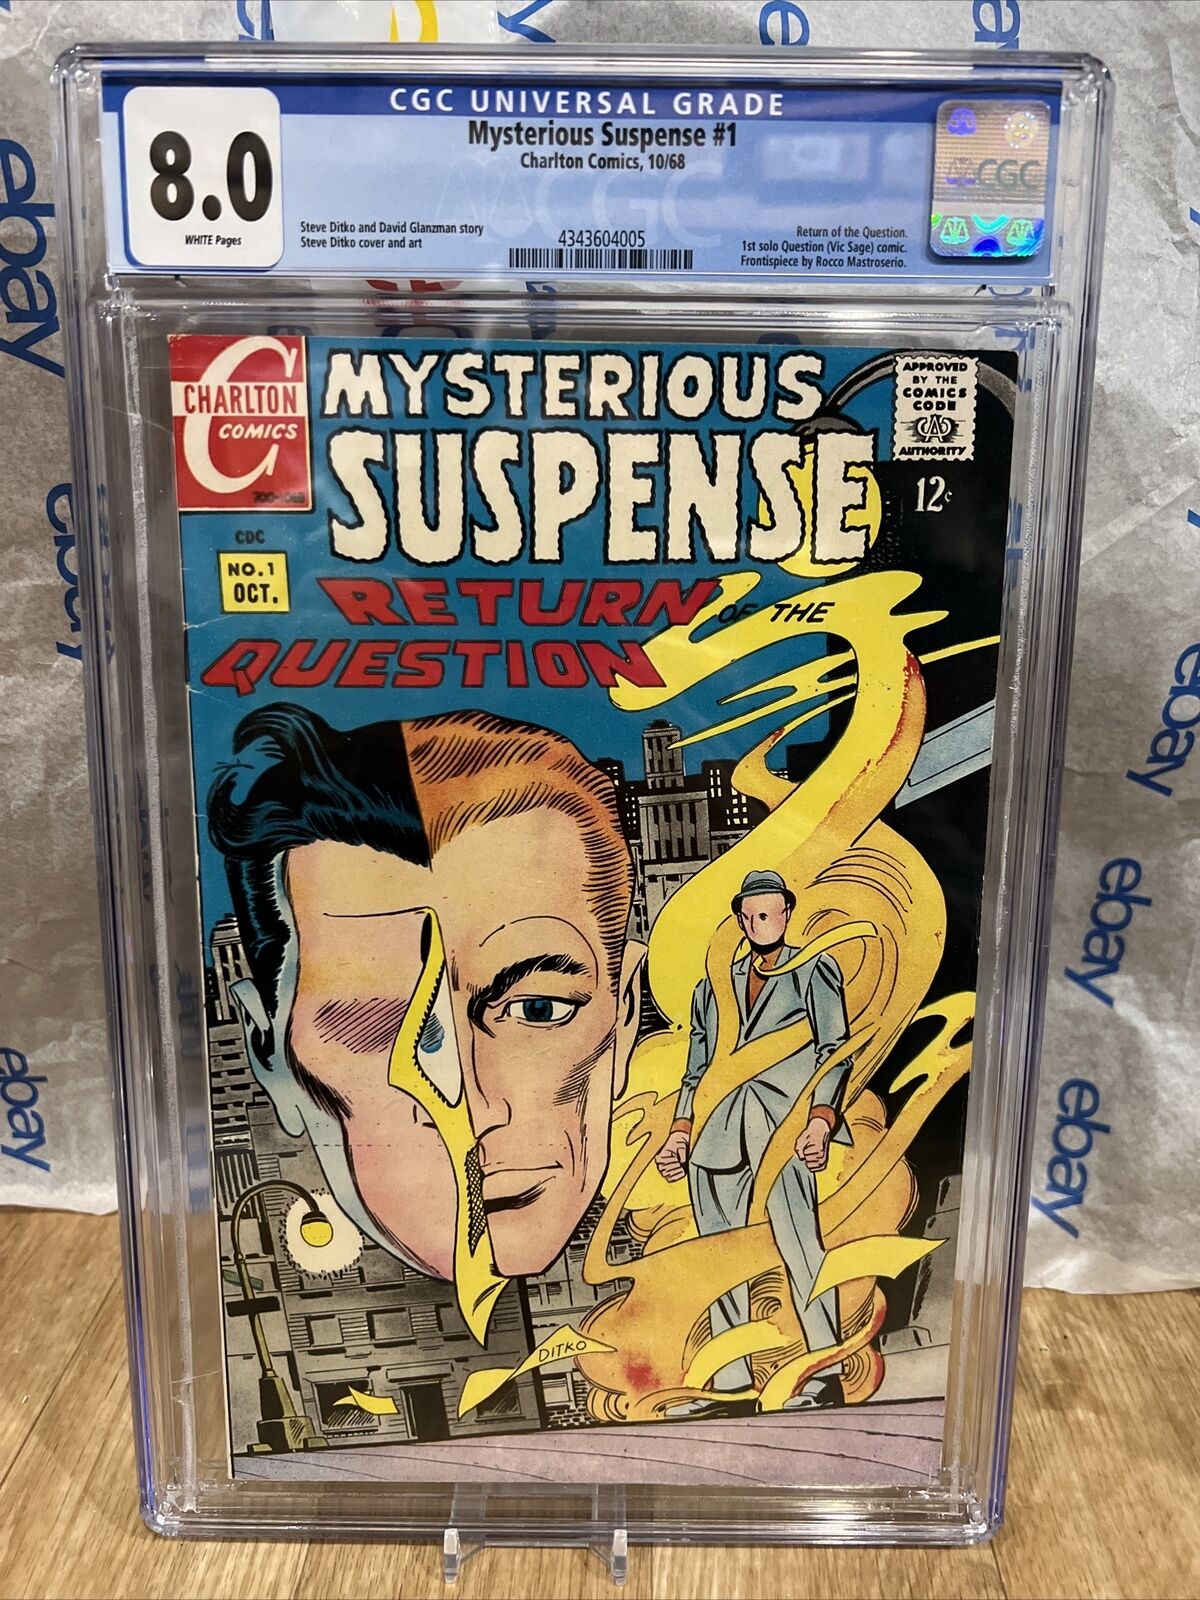 MYSTERIOUS SUSPENSE #1 1st VIC SAGE the QUESTION 1968 Charlton DCU DITKO CGC 8.0